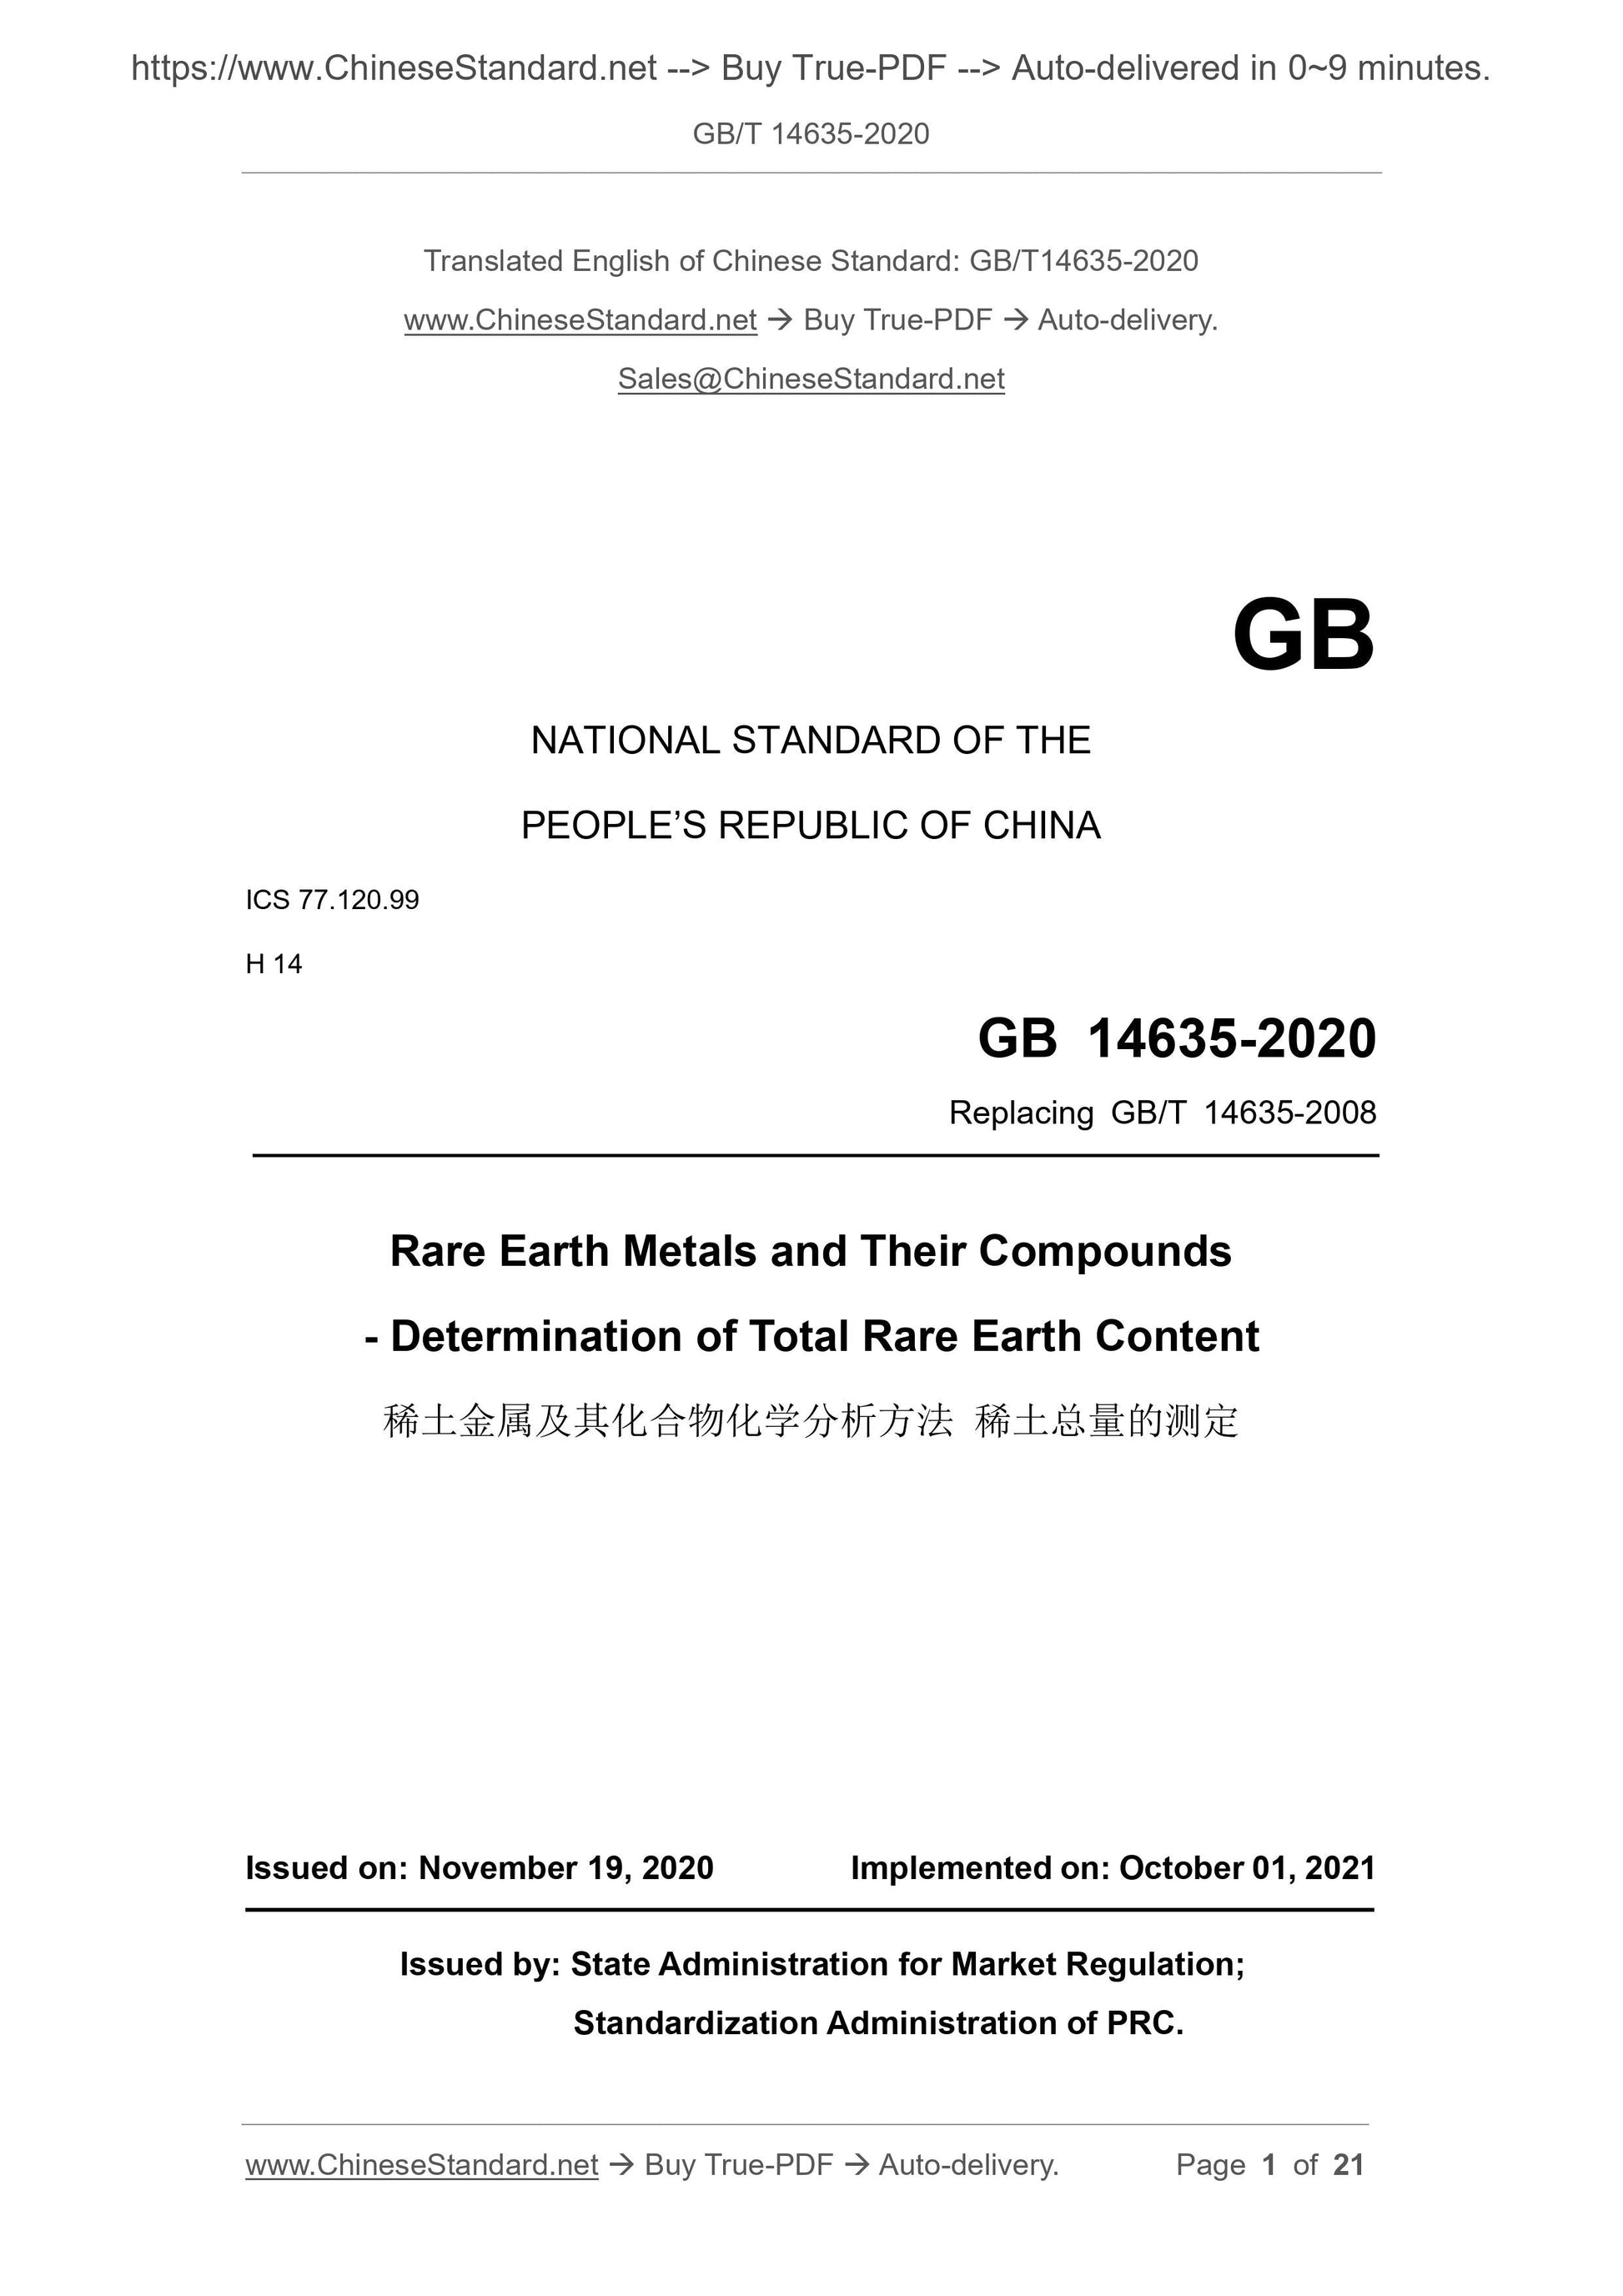 GB/T 14635-2020 Page 1